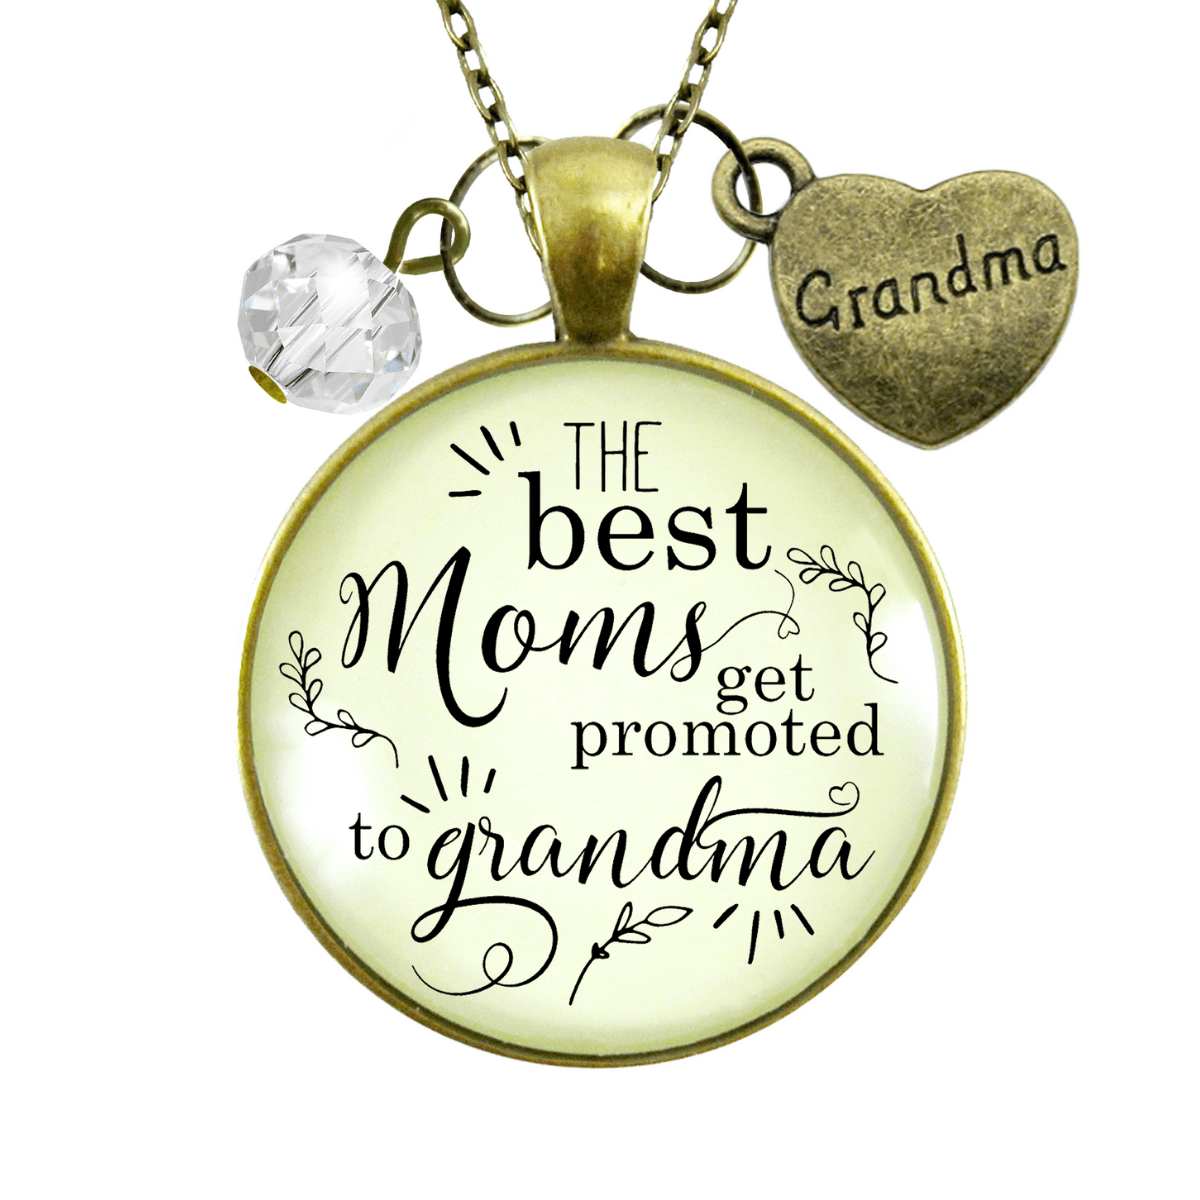 Gutsy Goodness New Grandma Necklace Best Moms Promoted Grandmother Jewelry Gift - Gutsy Goodness Handmade Jewelry;New Grandma Necklace Best Moms Promoted Grandmother Jewelry Gift - Gutsy Goodness Handmade Jewelry Gifts